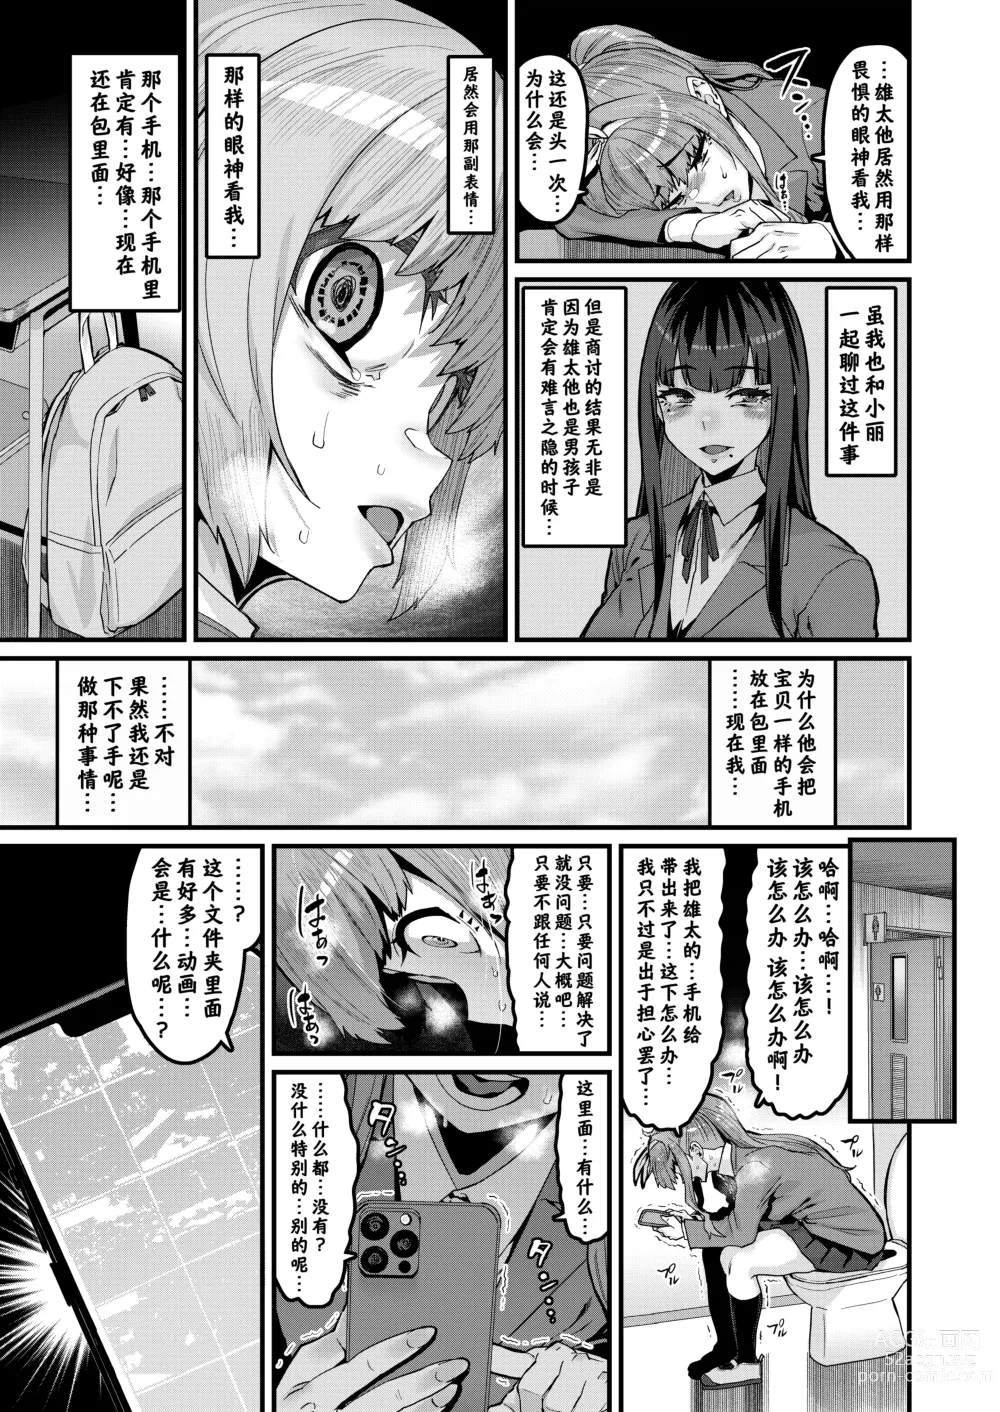 Page 6 of doujinshi 青梅竹马到此为止